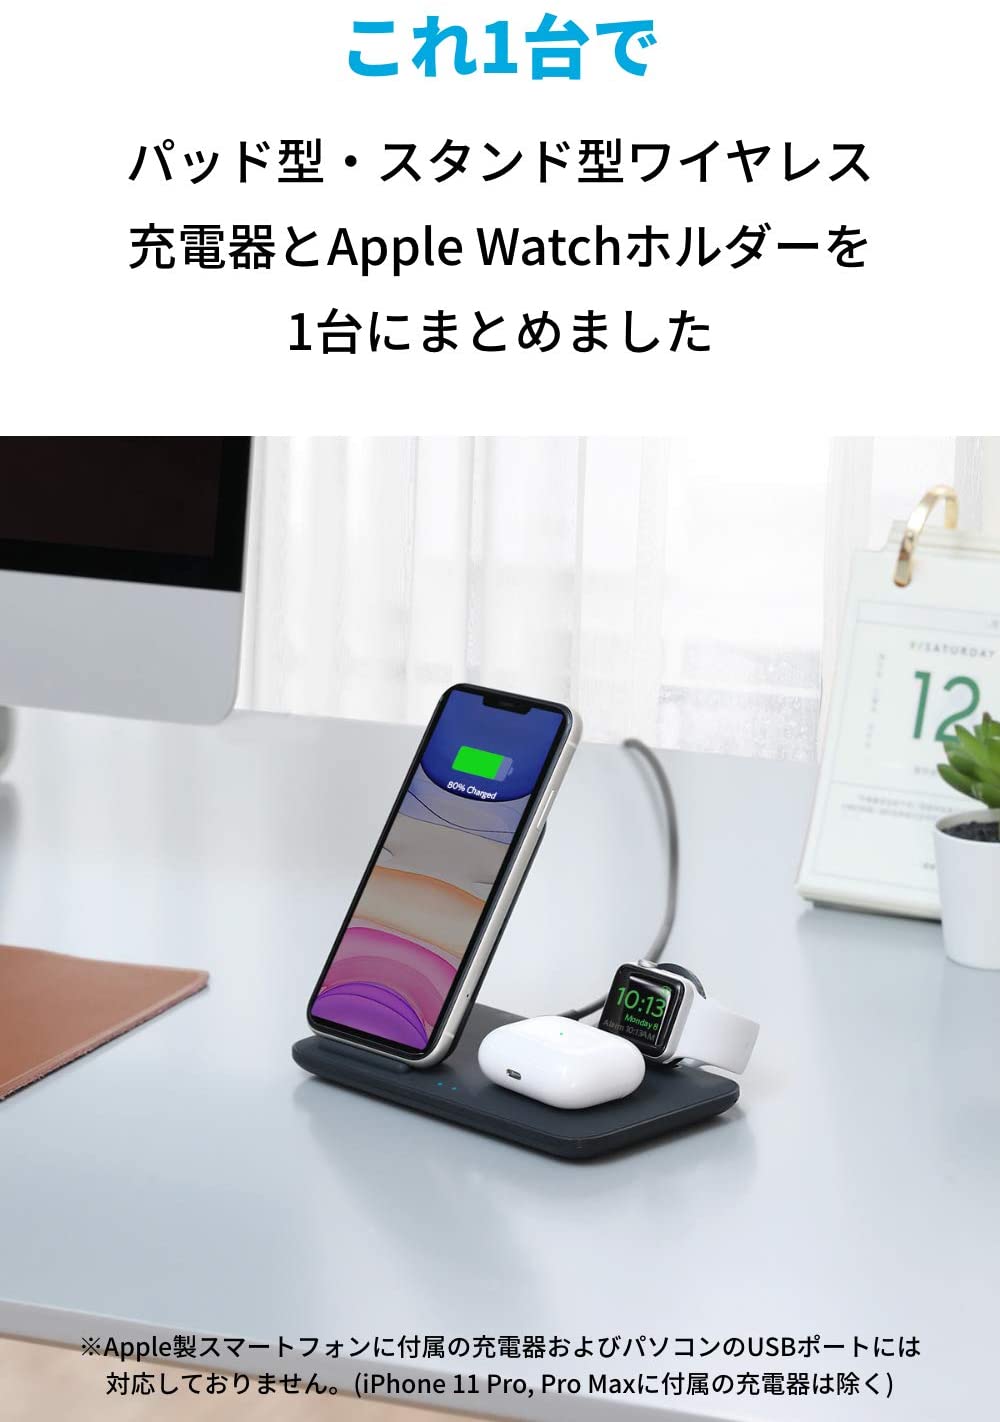 Off 3つの充電器を1つに Anker Powerwave 3 In 1 Stand With Watch Holder がセール中 21年4月25日 エキサイトニュース